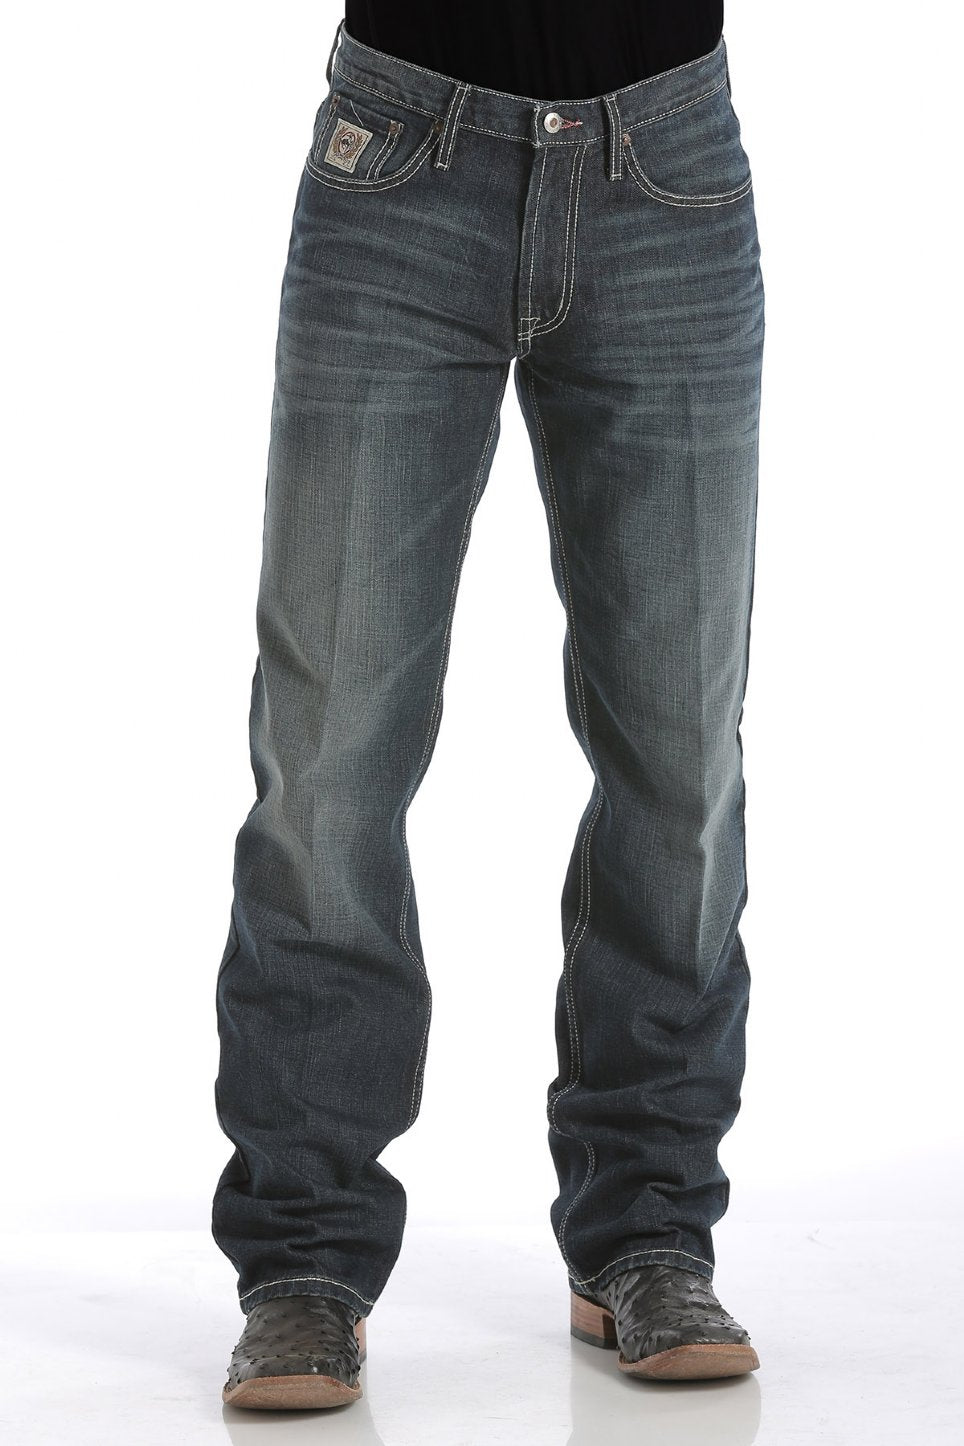 Cinch Men's Relaxed Fit White Label Jeans - Dark Stonewash - MB92834019